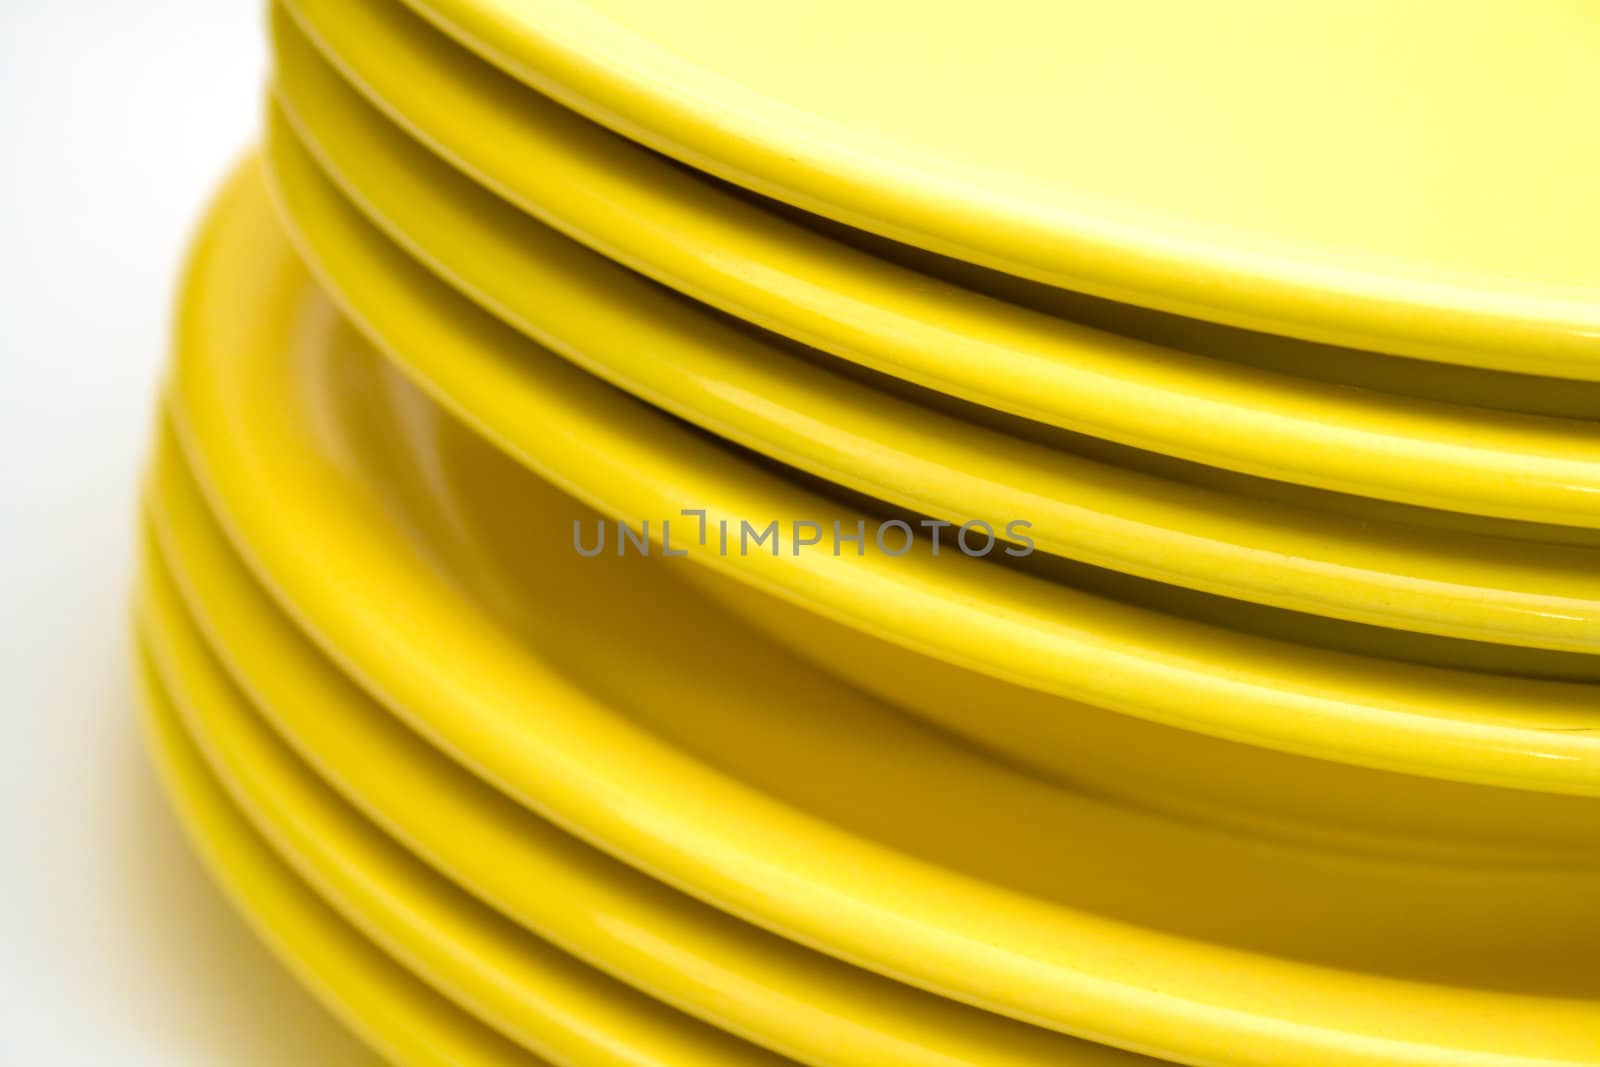 Stack of yellow plates by nubephoto